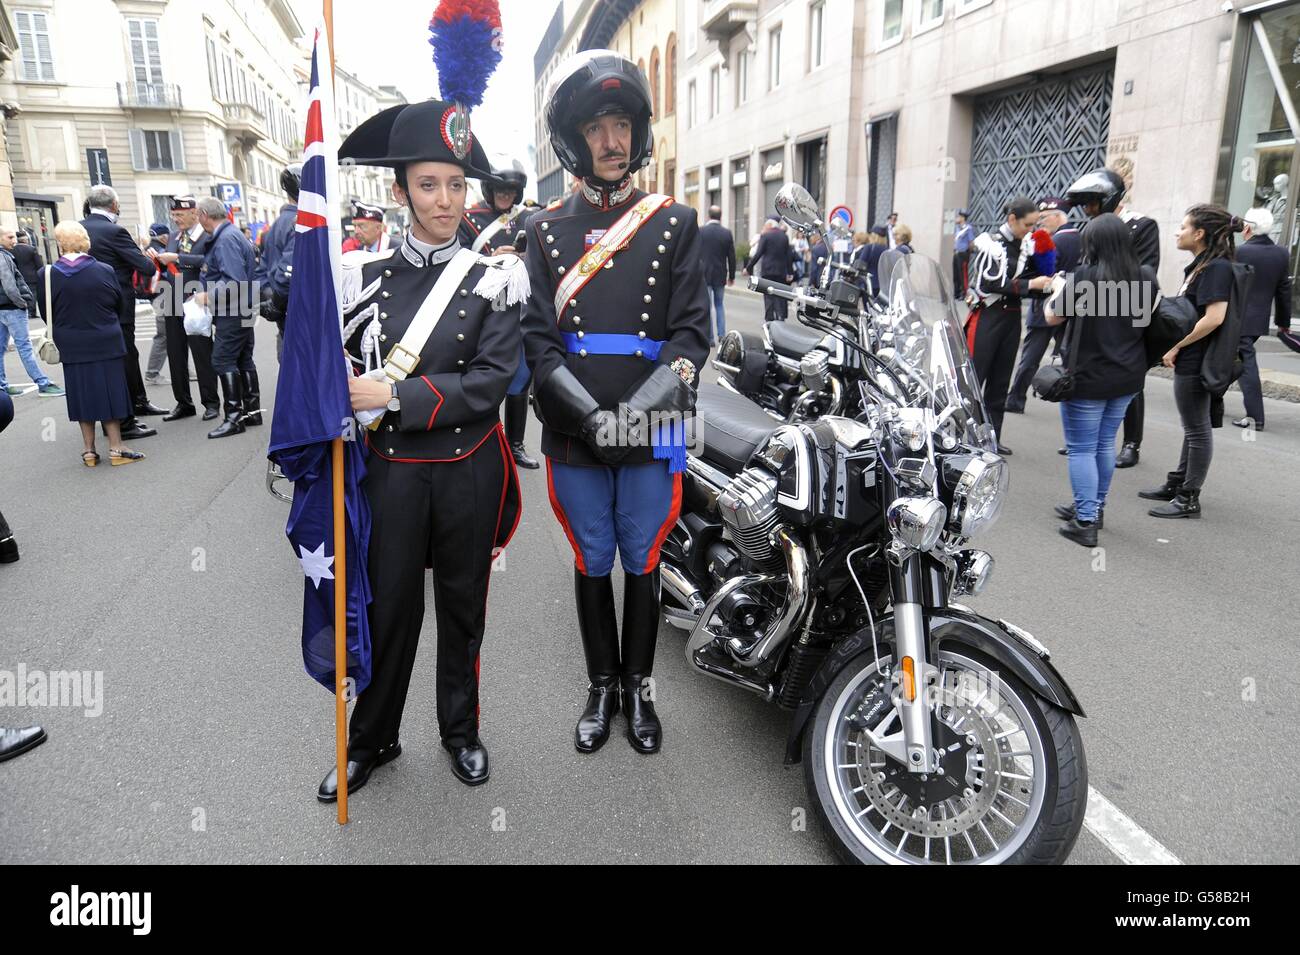 Carabinieri National Association gathering to celebrate 202 anniversary  of foundation; Cuirassiers on motorcycles Stock Photo